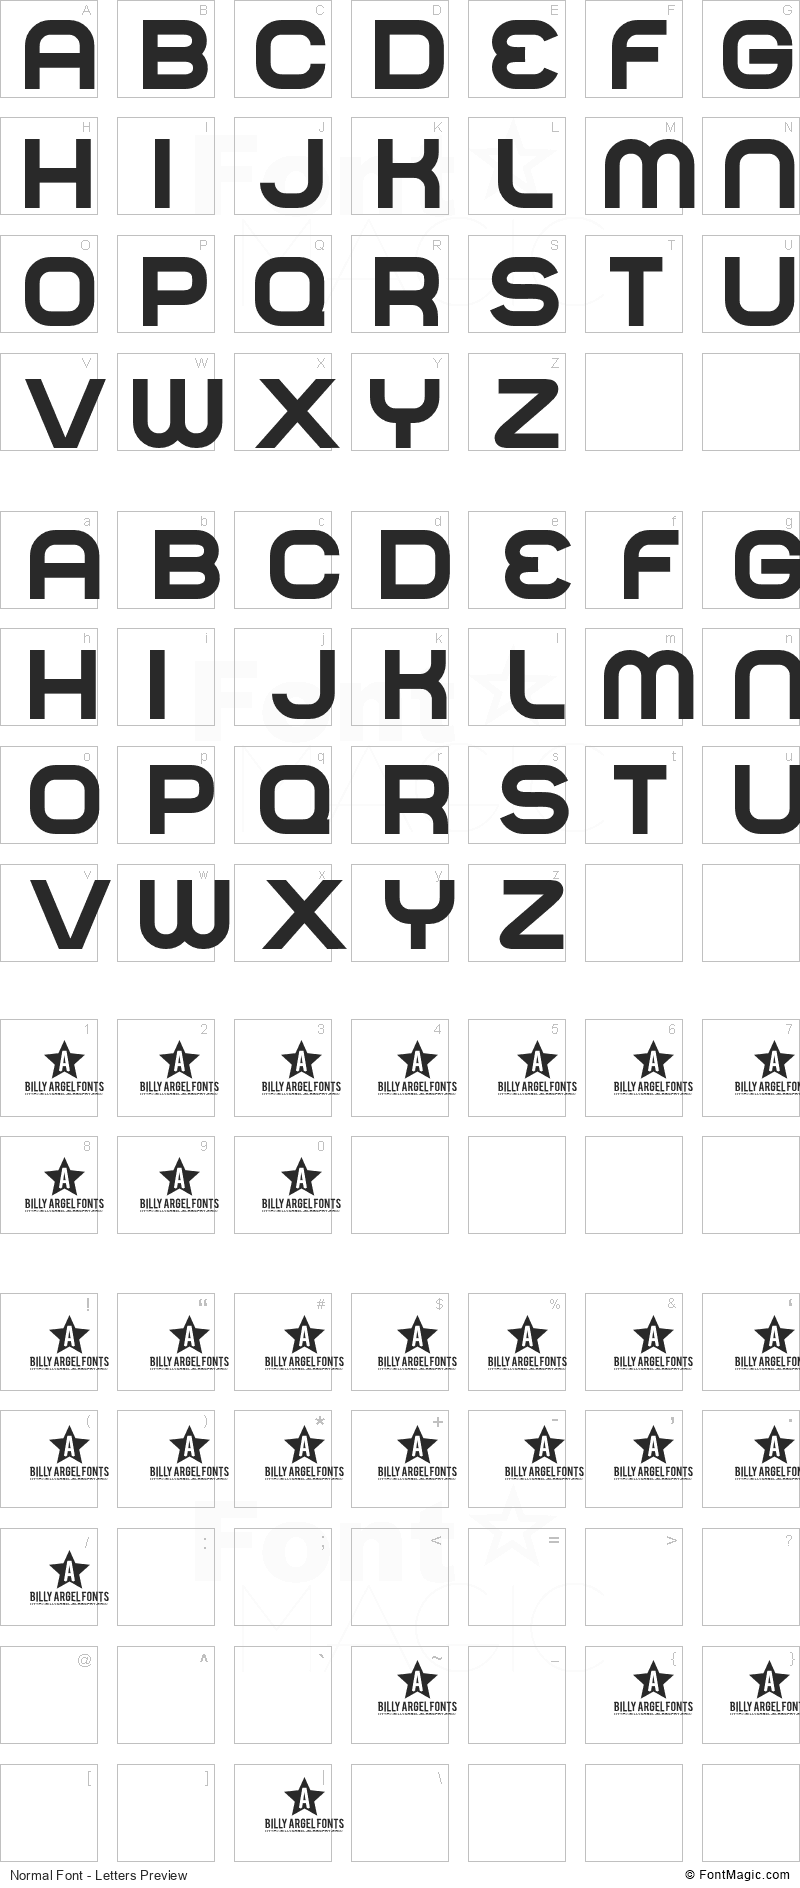 Normal Font - All Latters Preview Chart